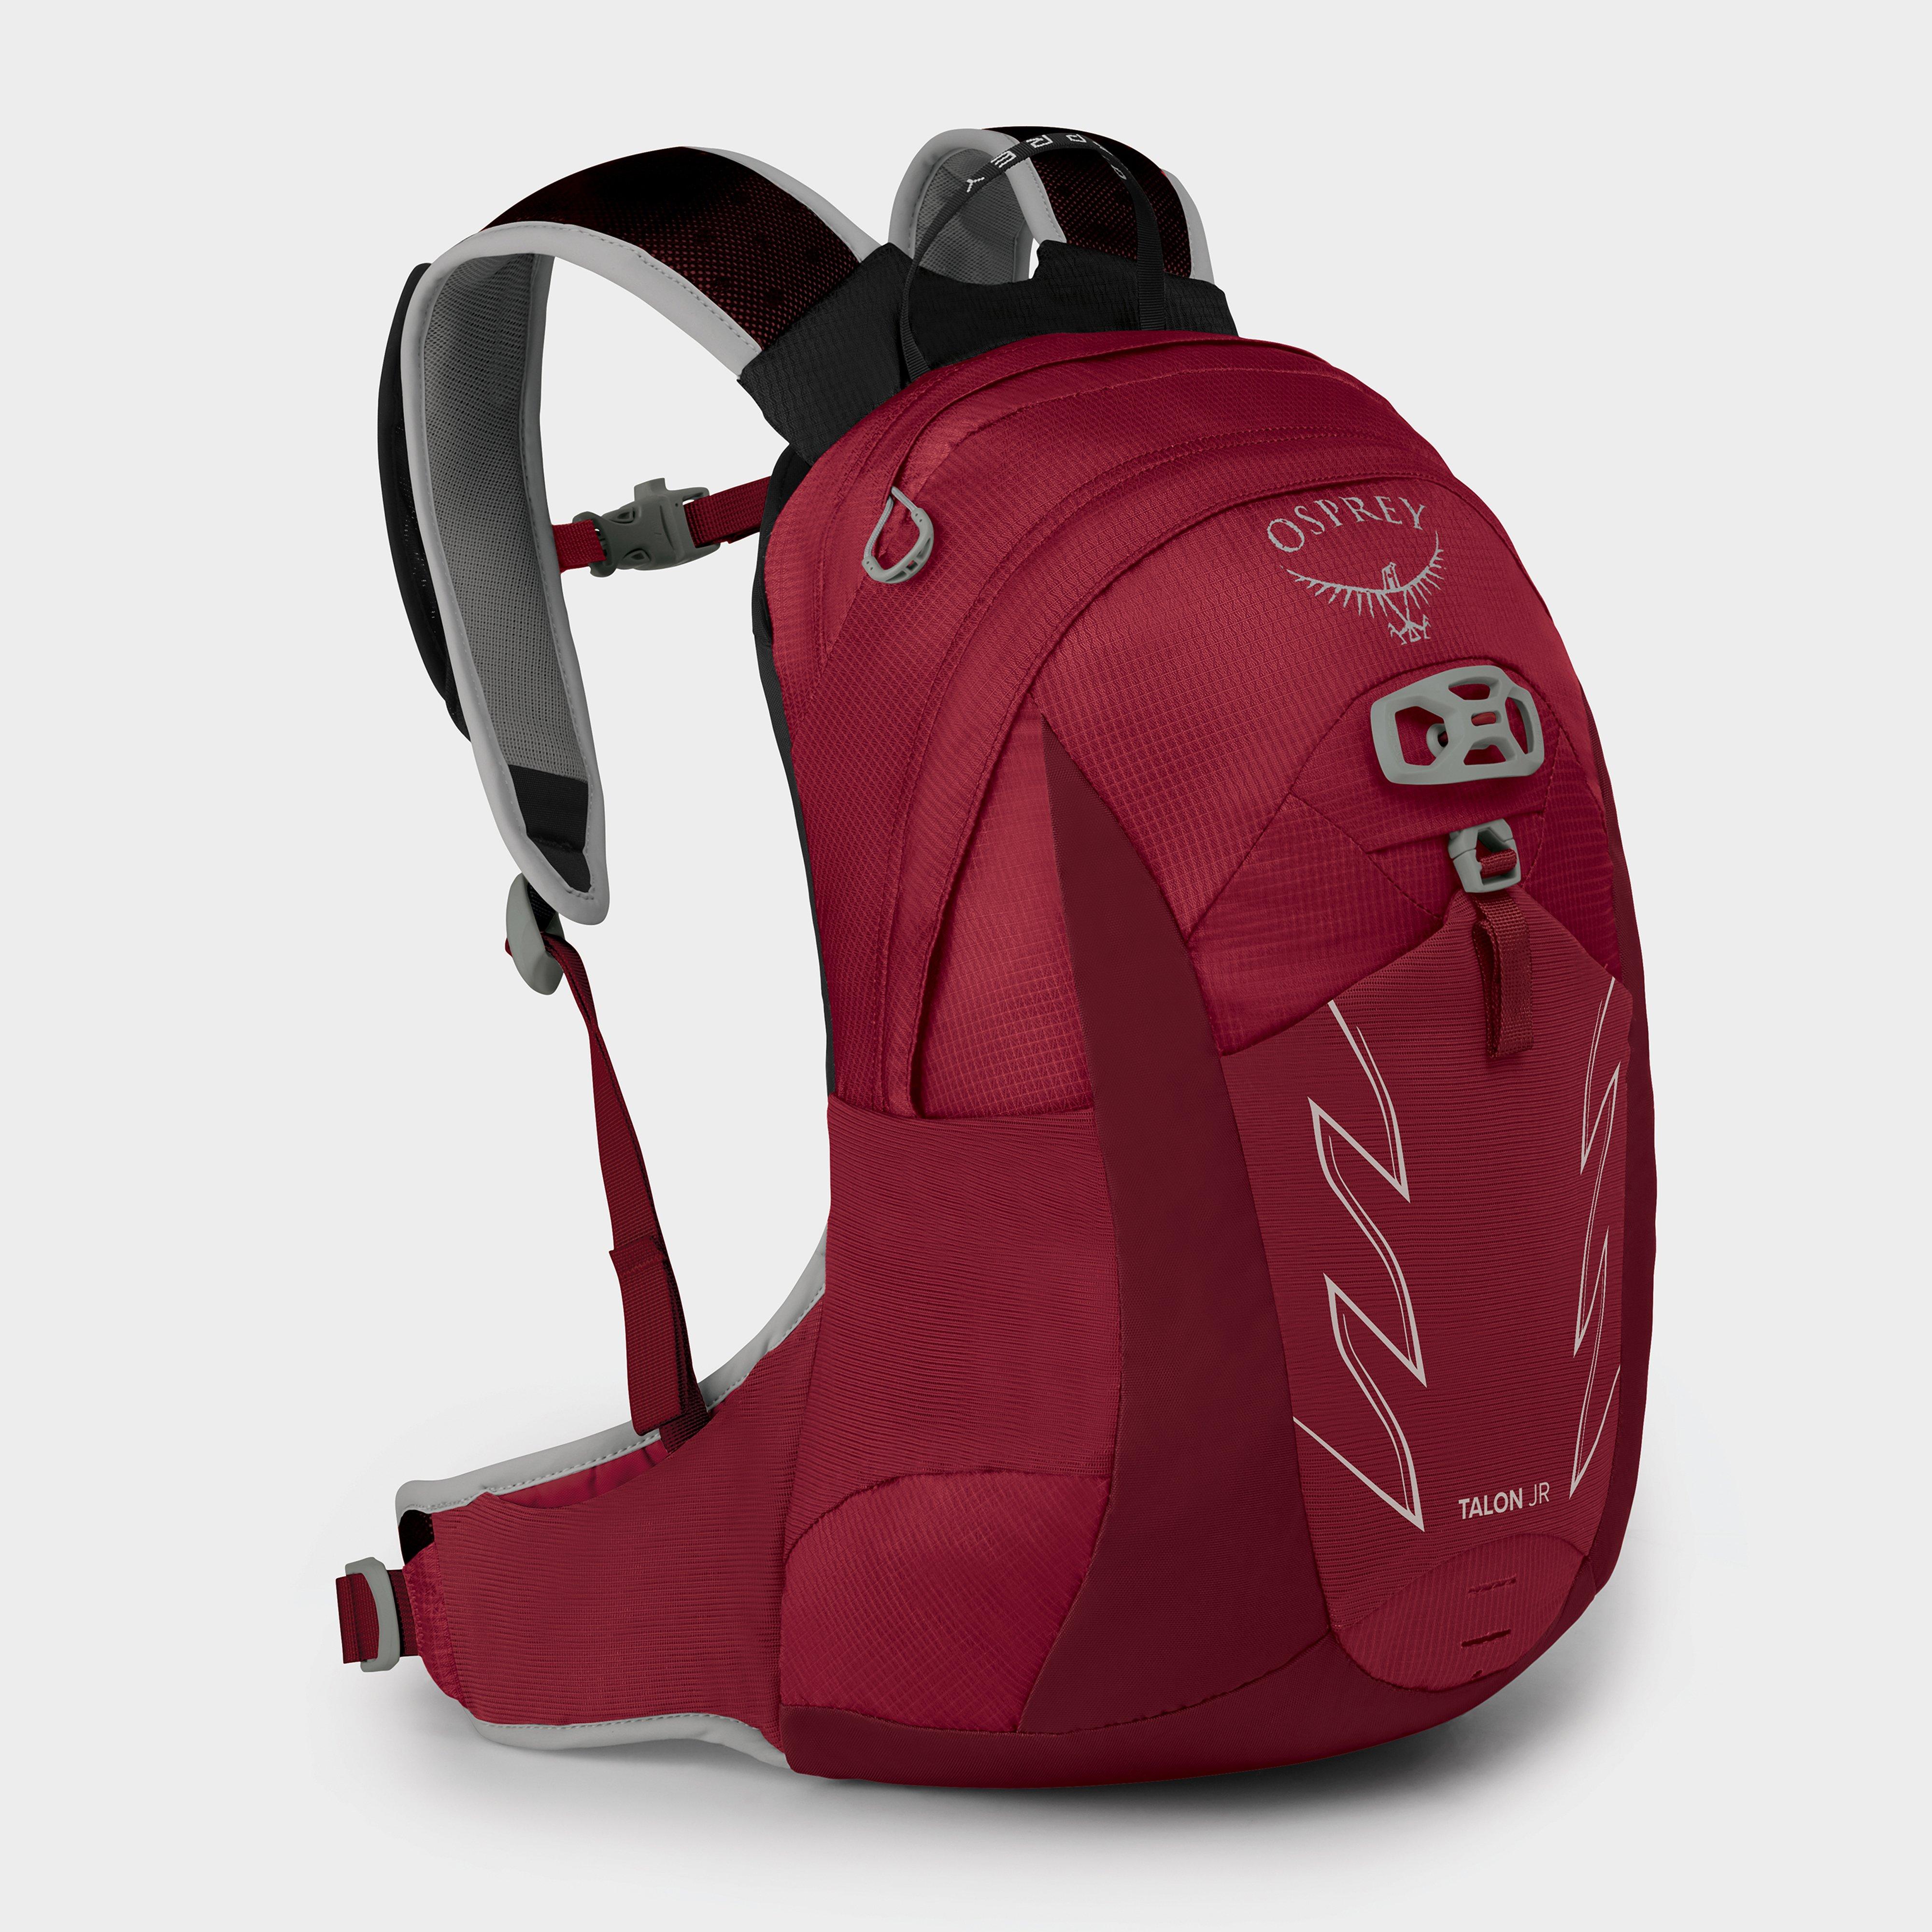 Osprey Talon 11 Litre Junior Daypack - Red/red  Red/red